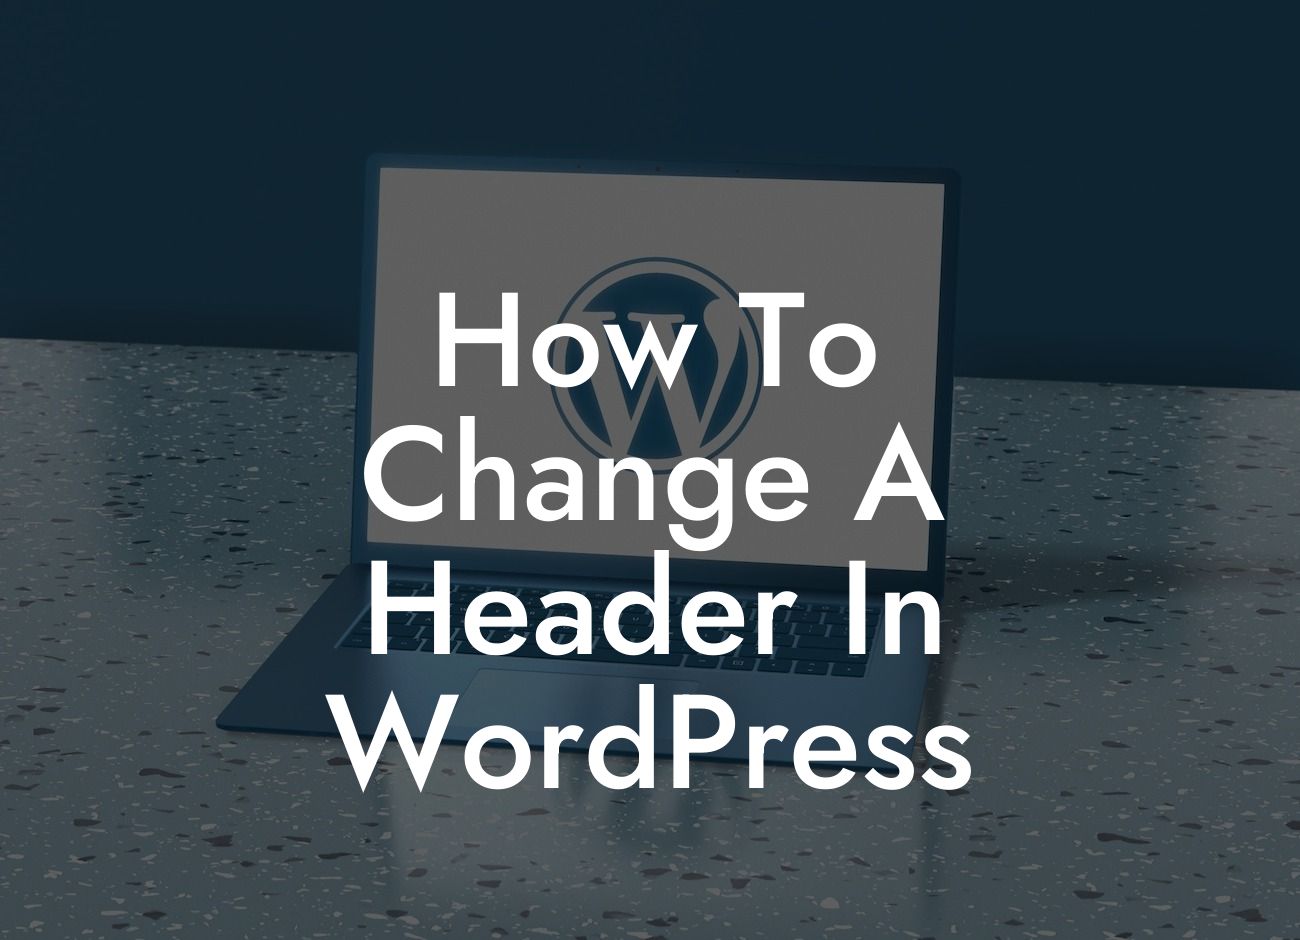 How To Change A Header In WordPress